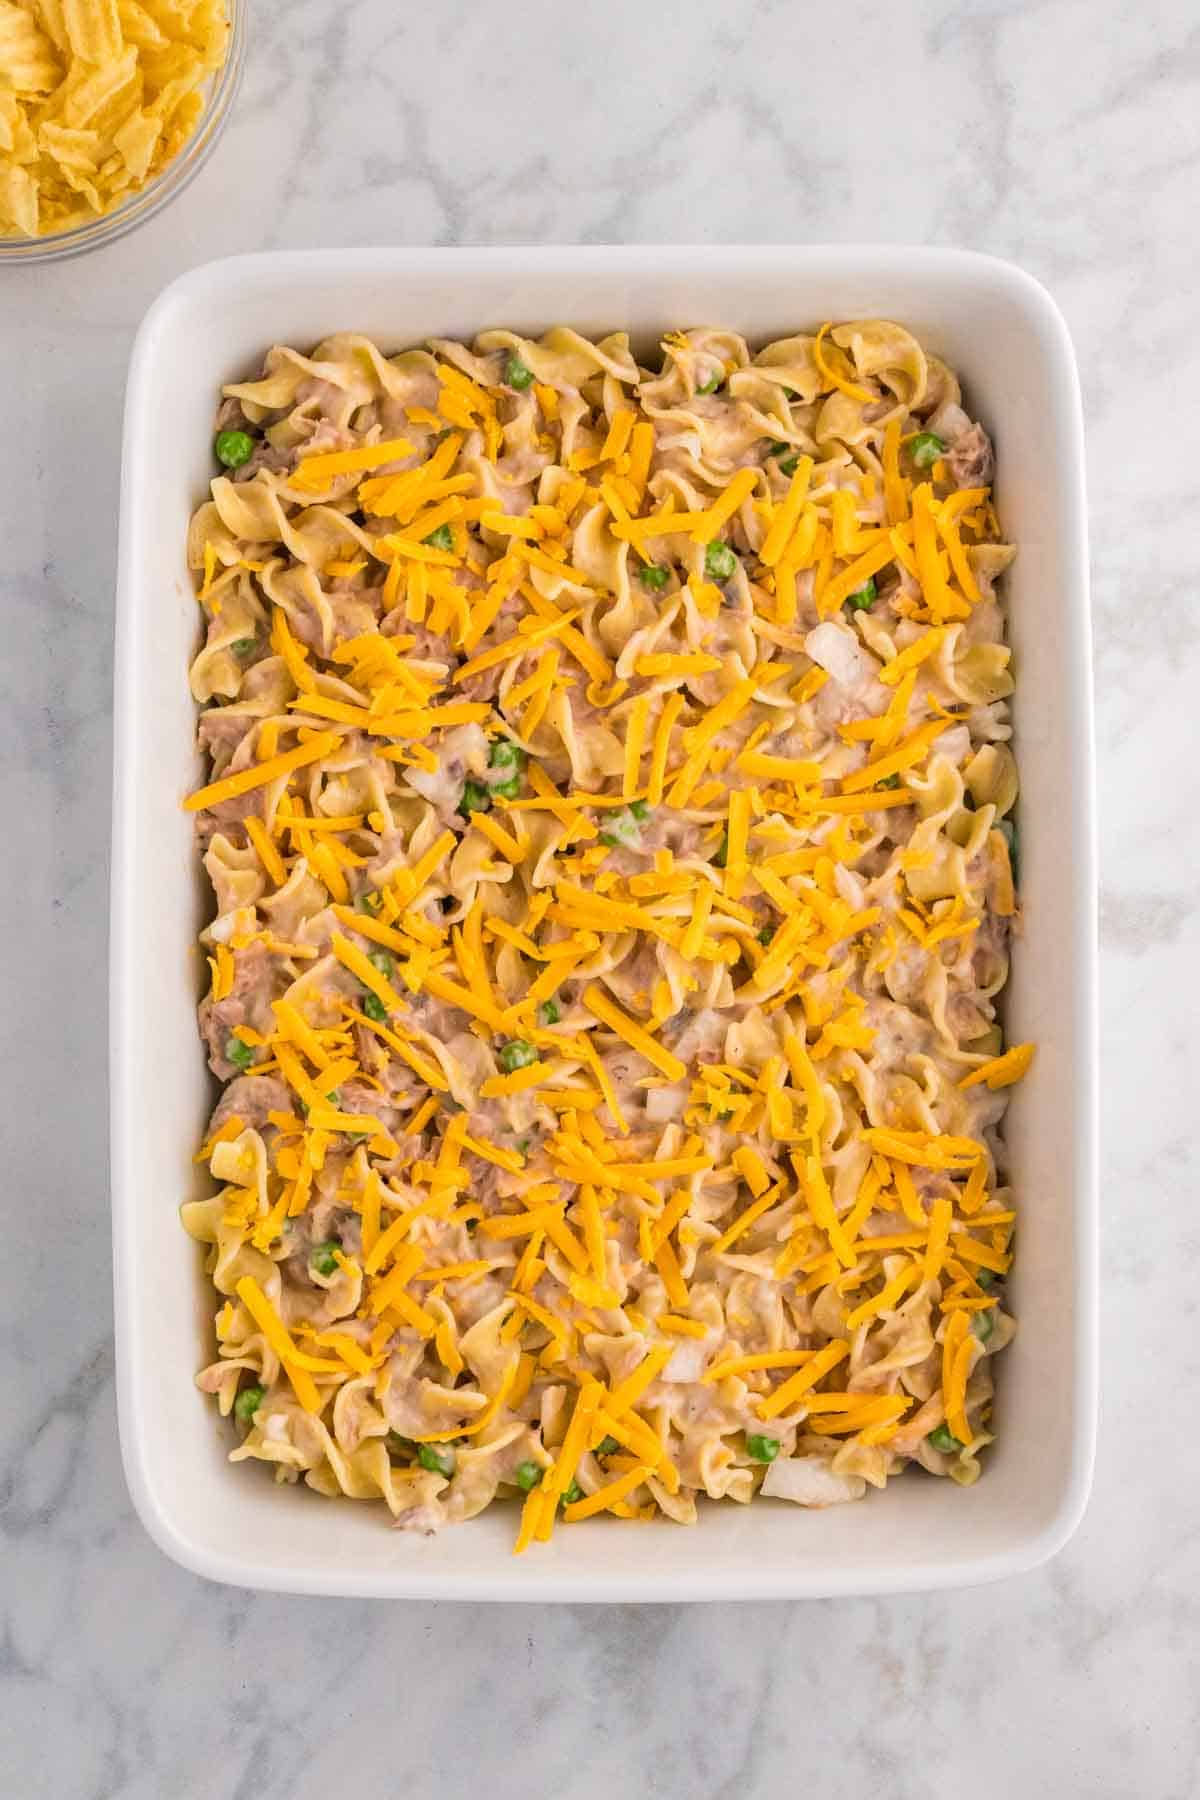 shredded cheese on top of tuna noodle casserole